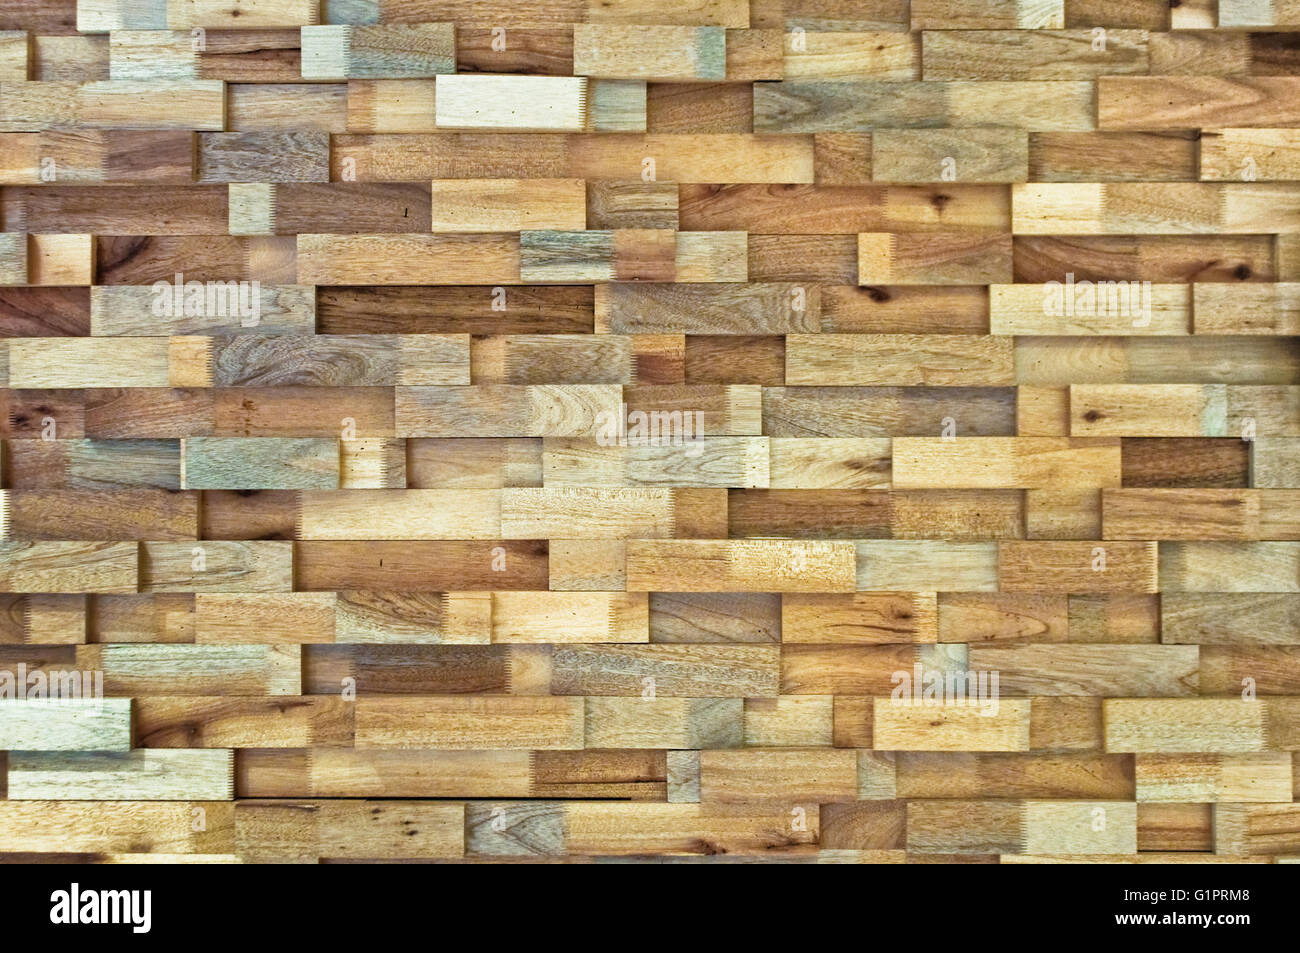 Cut wood texture background. Interior wooden wall. Wood pieces arrangement  cause light and shadow effect Stock Photo - Alamy